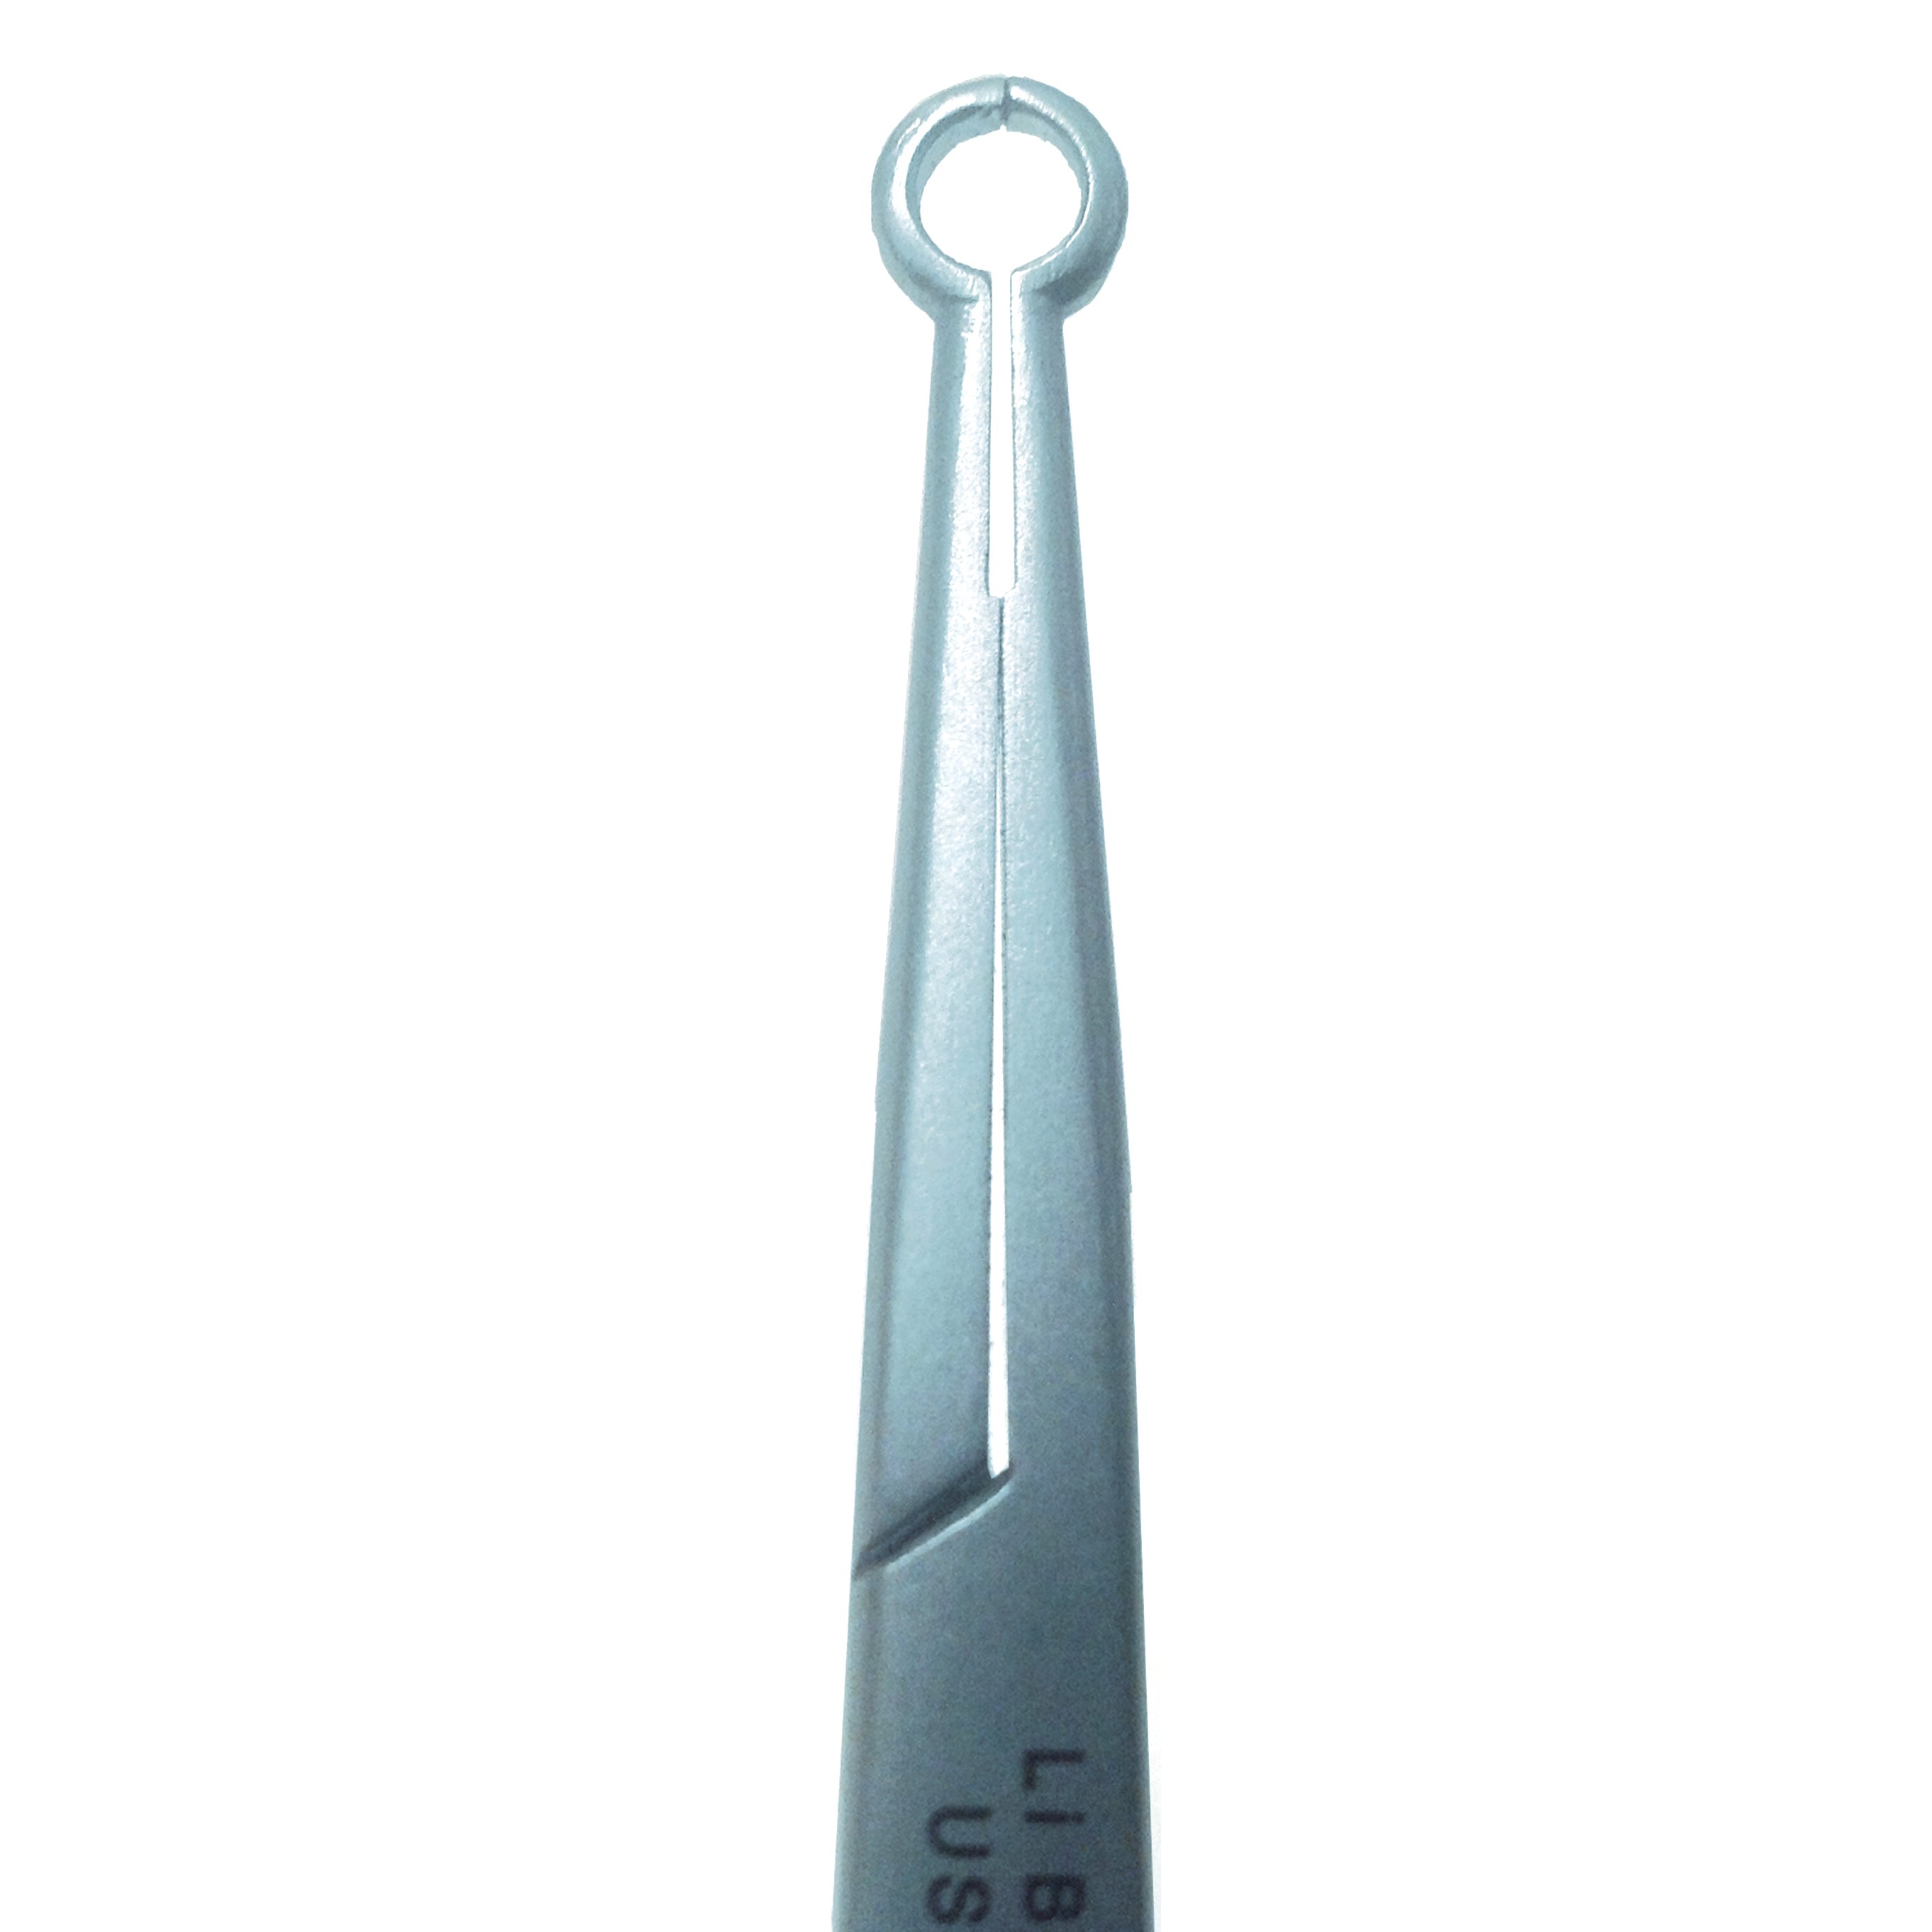 No Scalpel Vasectomy Ring Clamp